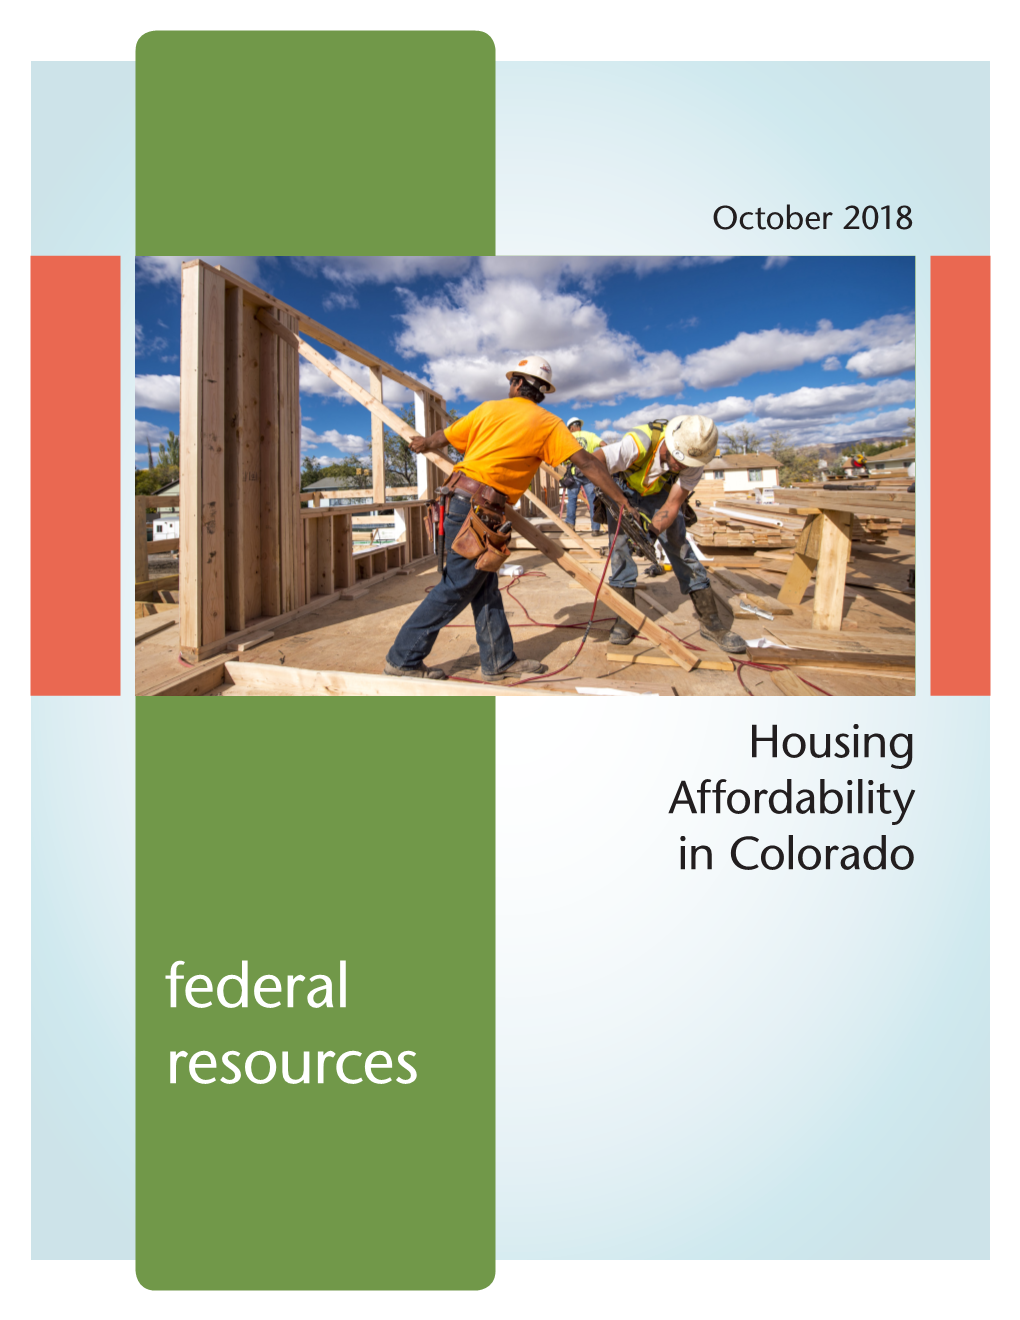 Federal Housing Resources